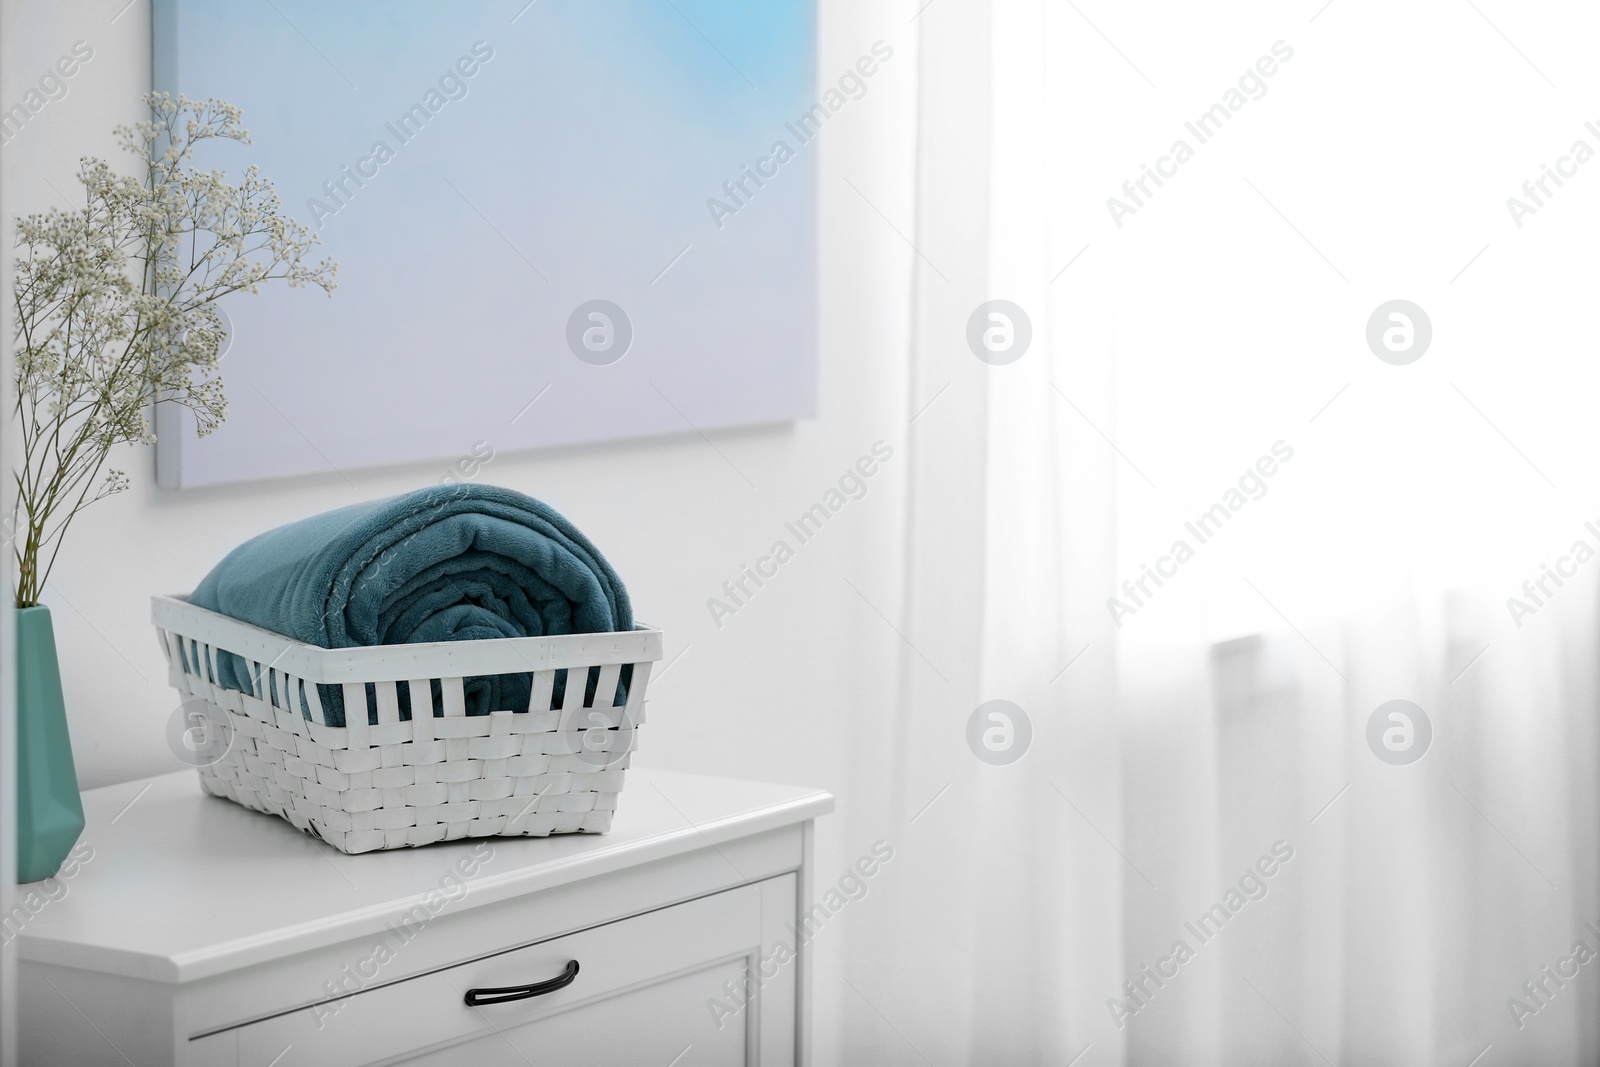 Photo of Basket with soft plaid on commode in room. Space for text